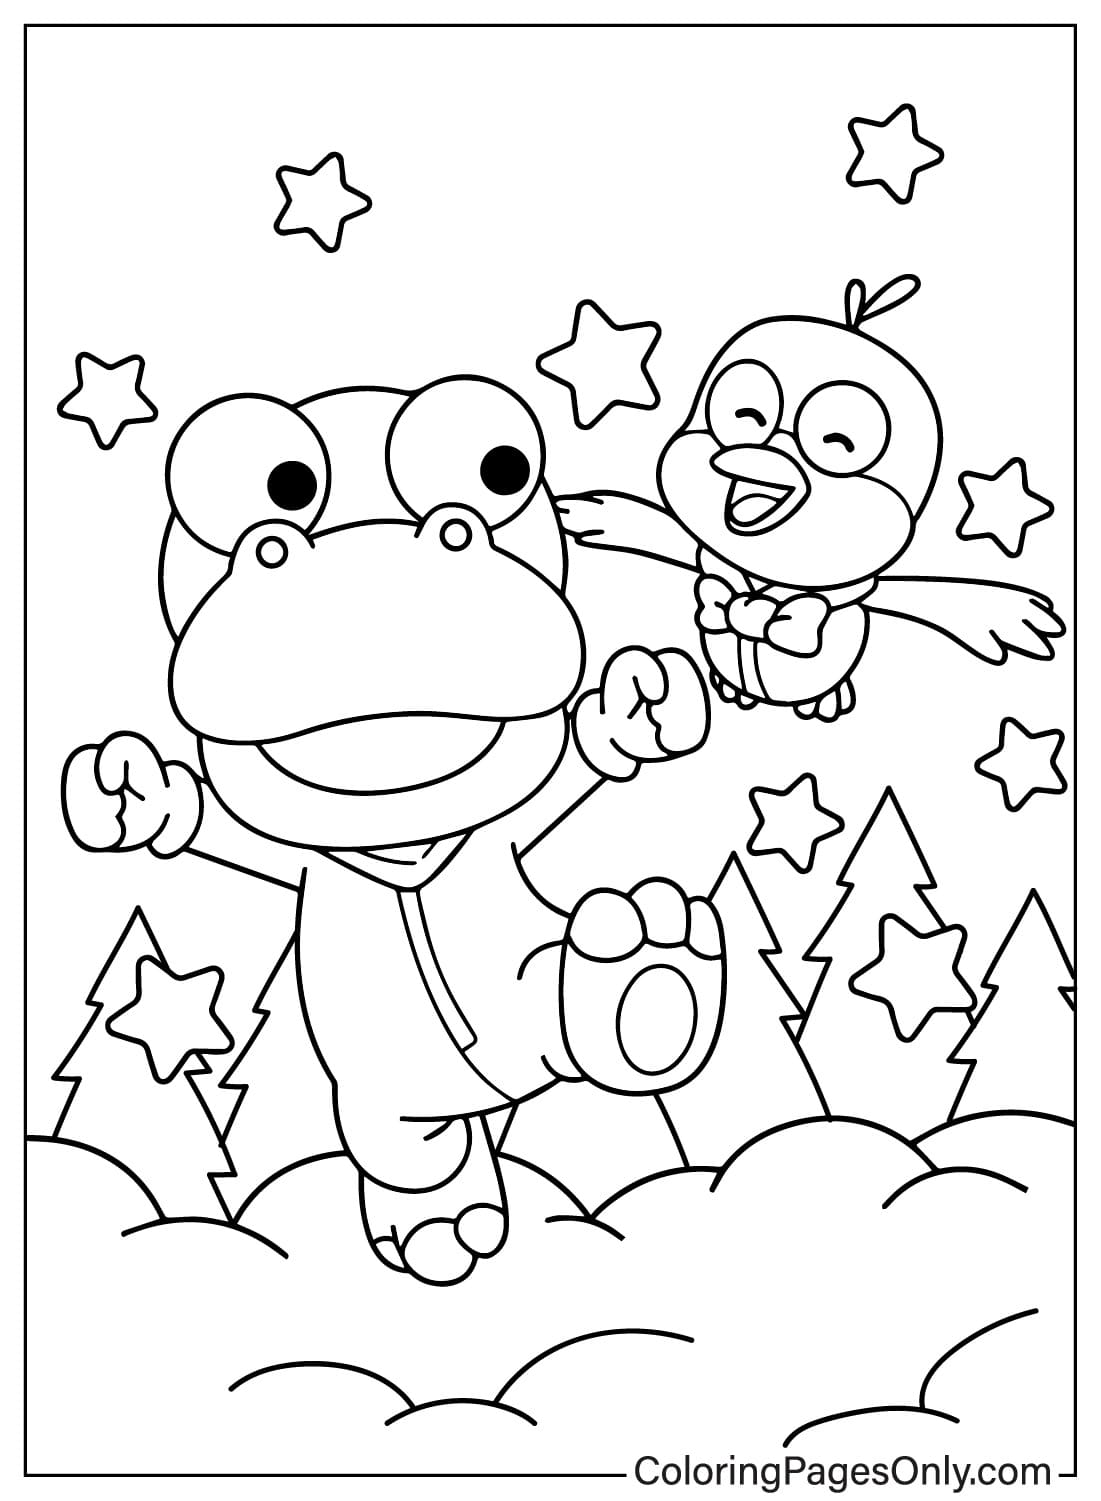 Crong, Harry Coloring Page Free from Pororo the Little Penguin